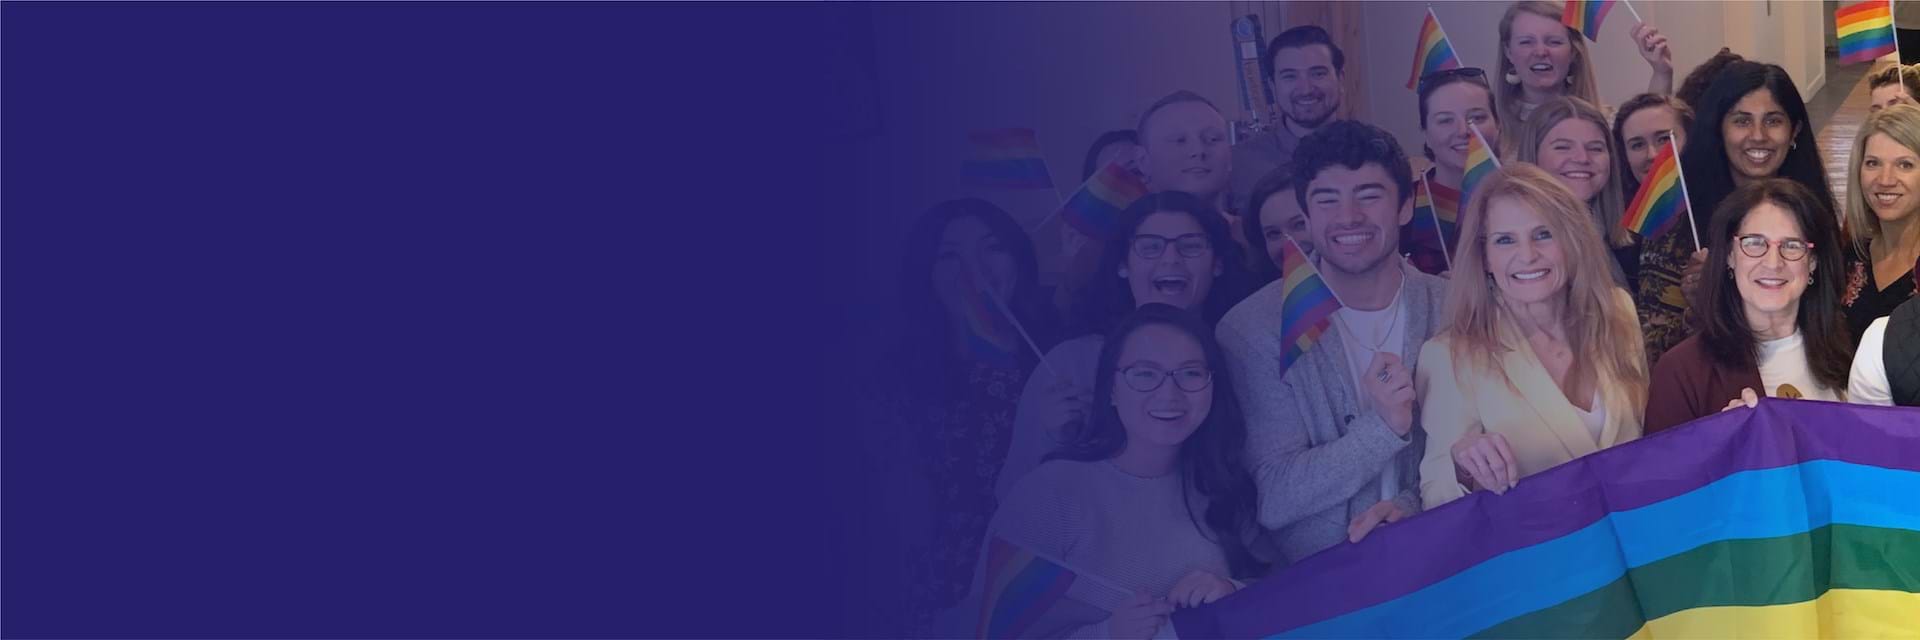 WE Communications Best Place to work for LGBTQ equality